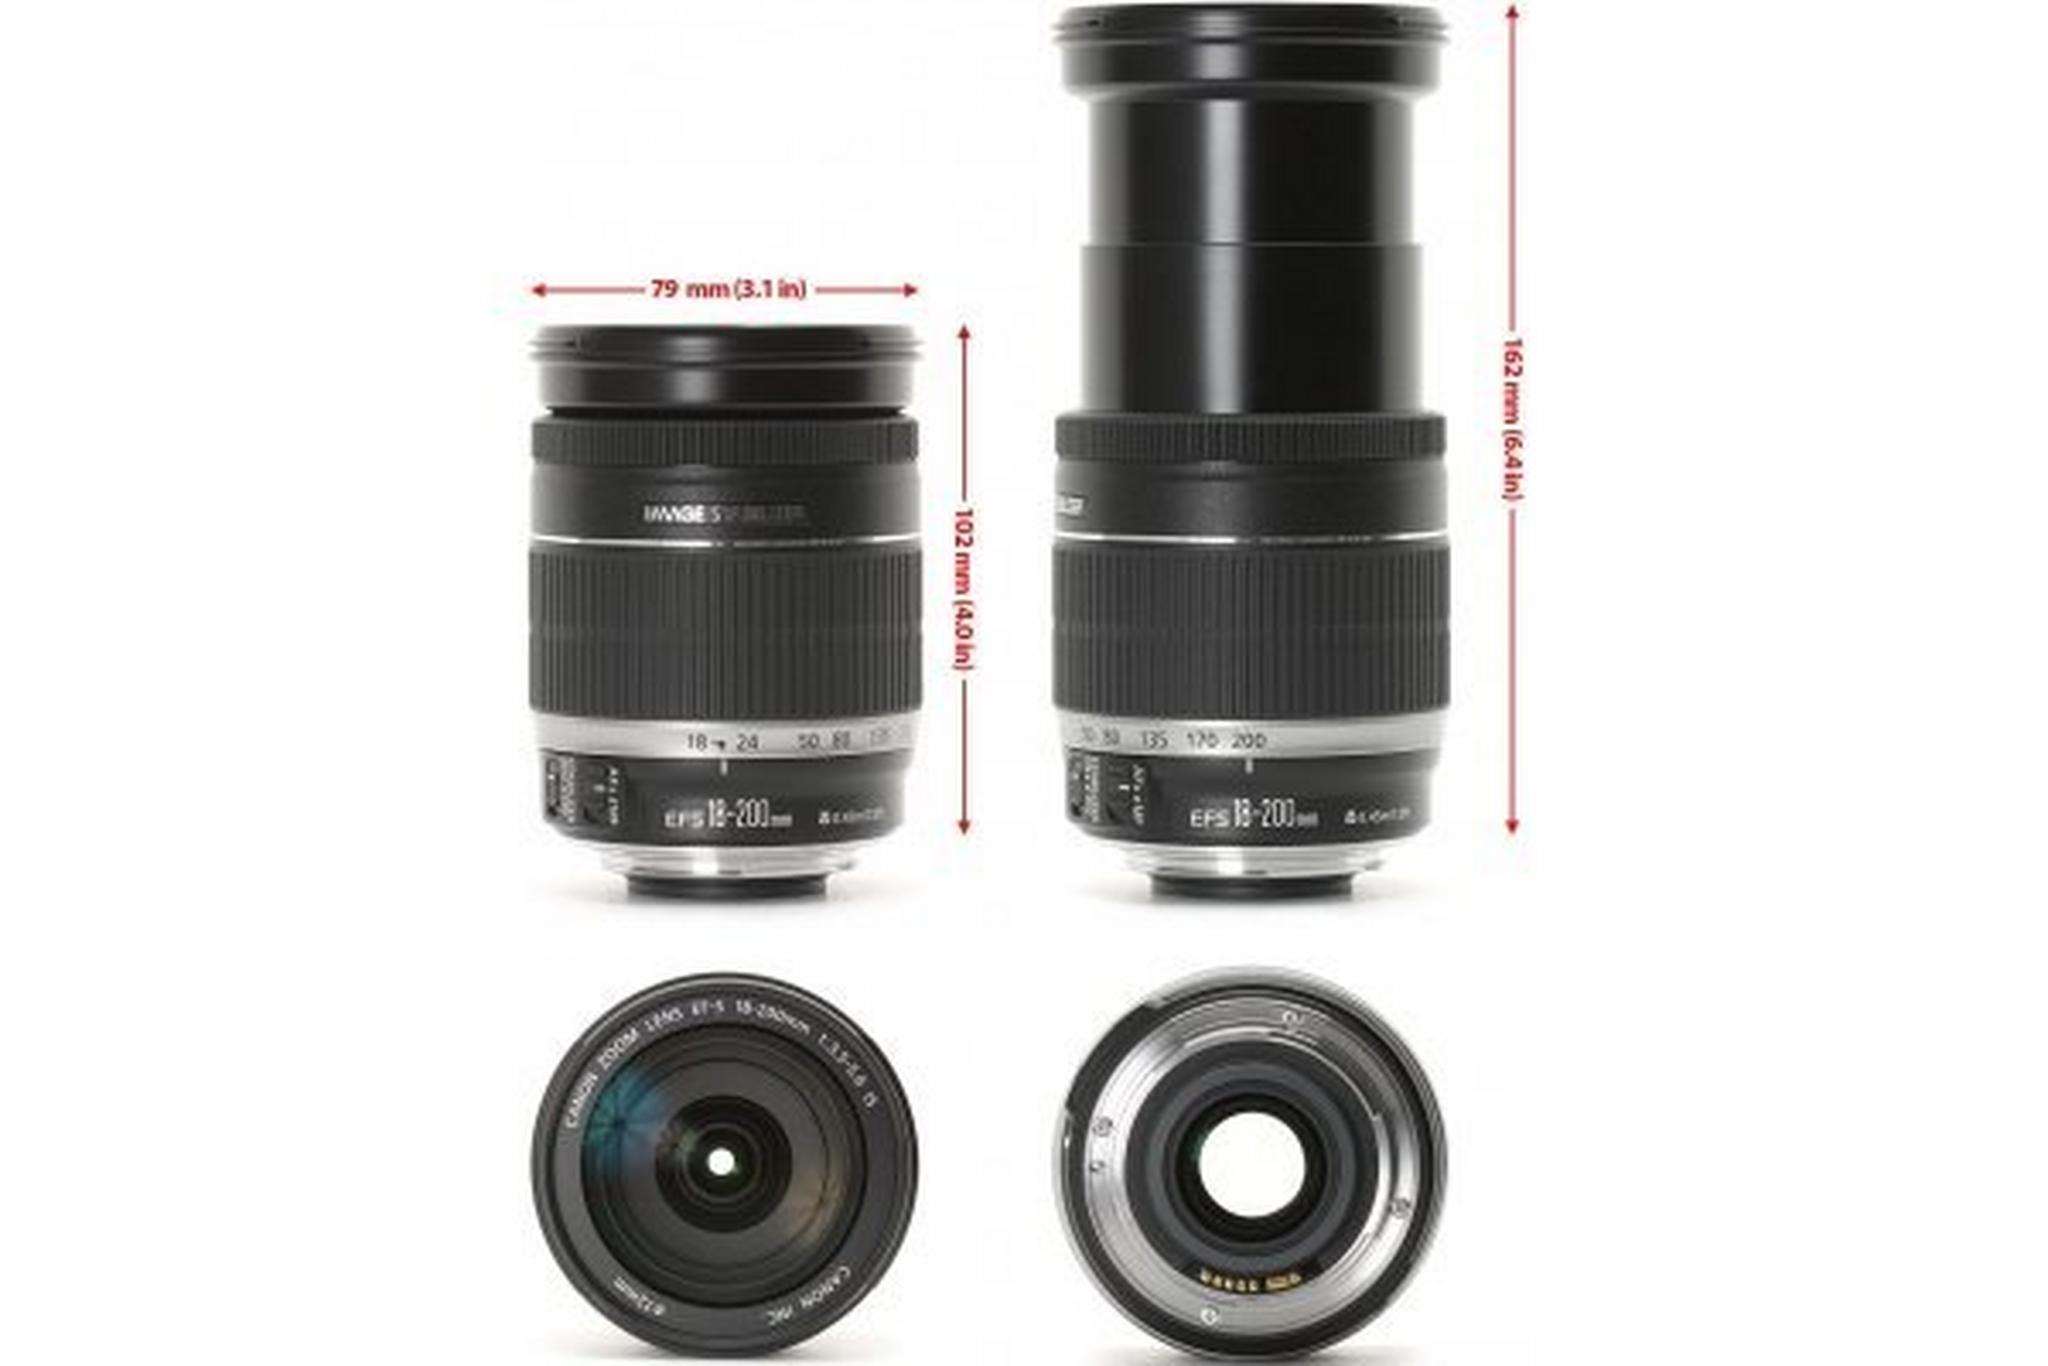 Canon EF-S 18-200mm F/3.5-5.6 IS Lens